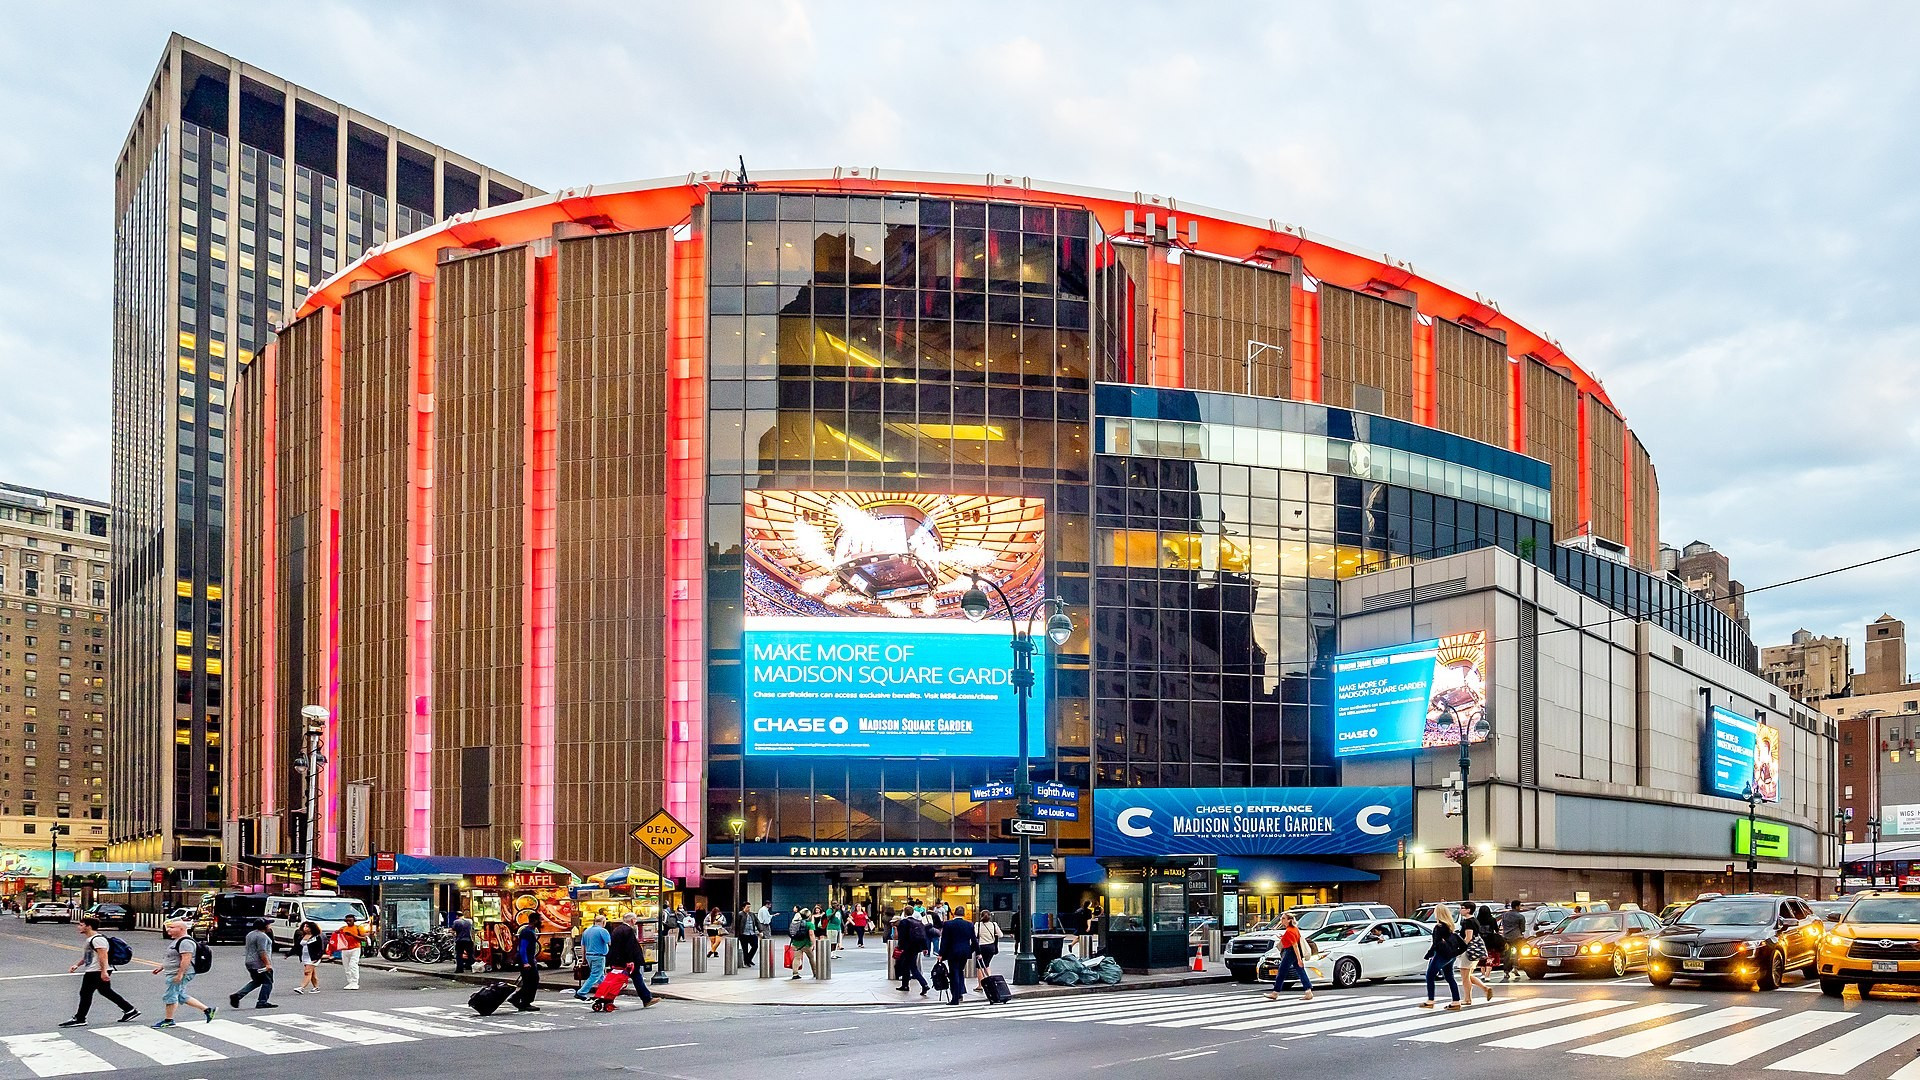 By Ajay Suresh from New York, NY, USA - Madison Square Garden (MSG) - Full, CC BY 2.0, https://commons.wikimedia.org/w/index.php?curid=79932922